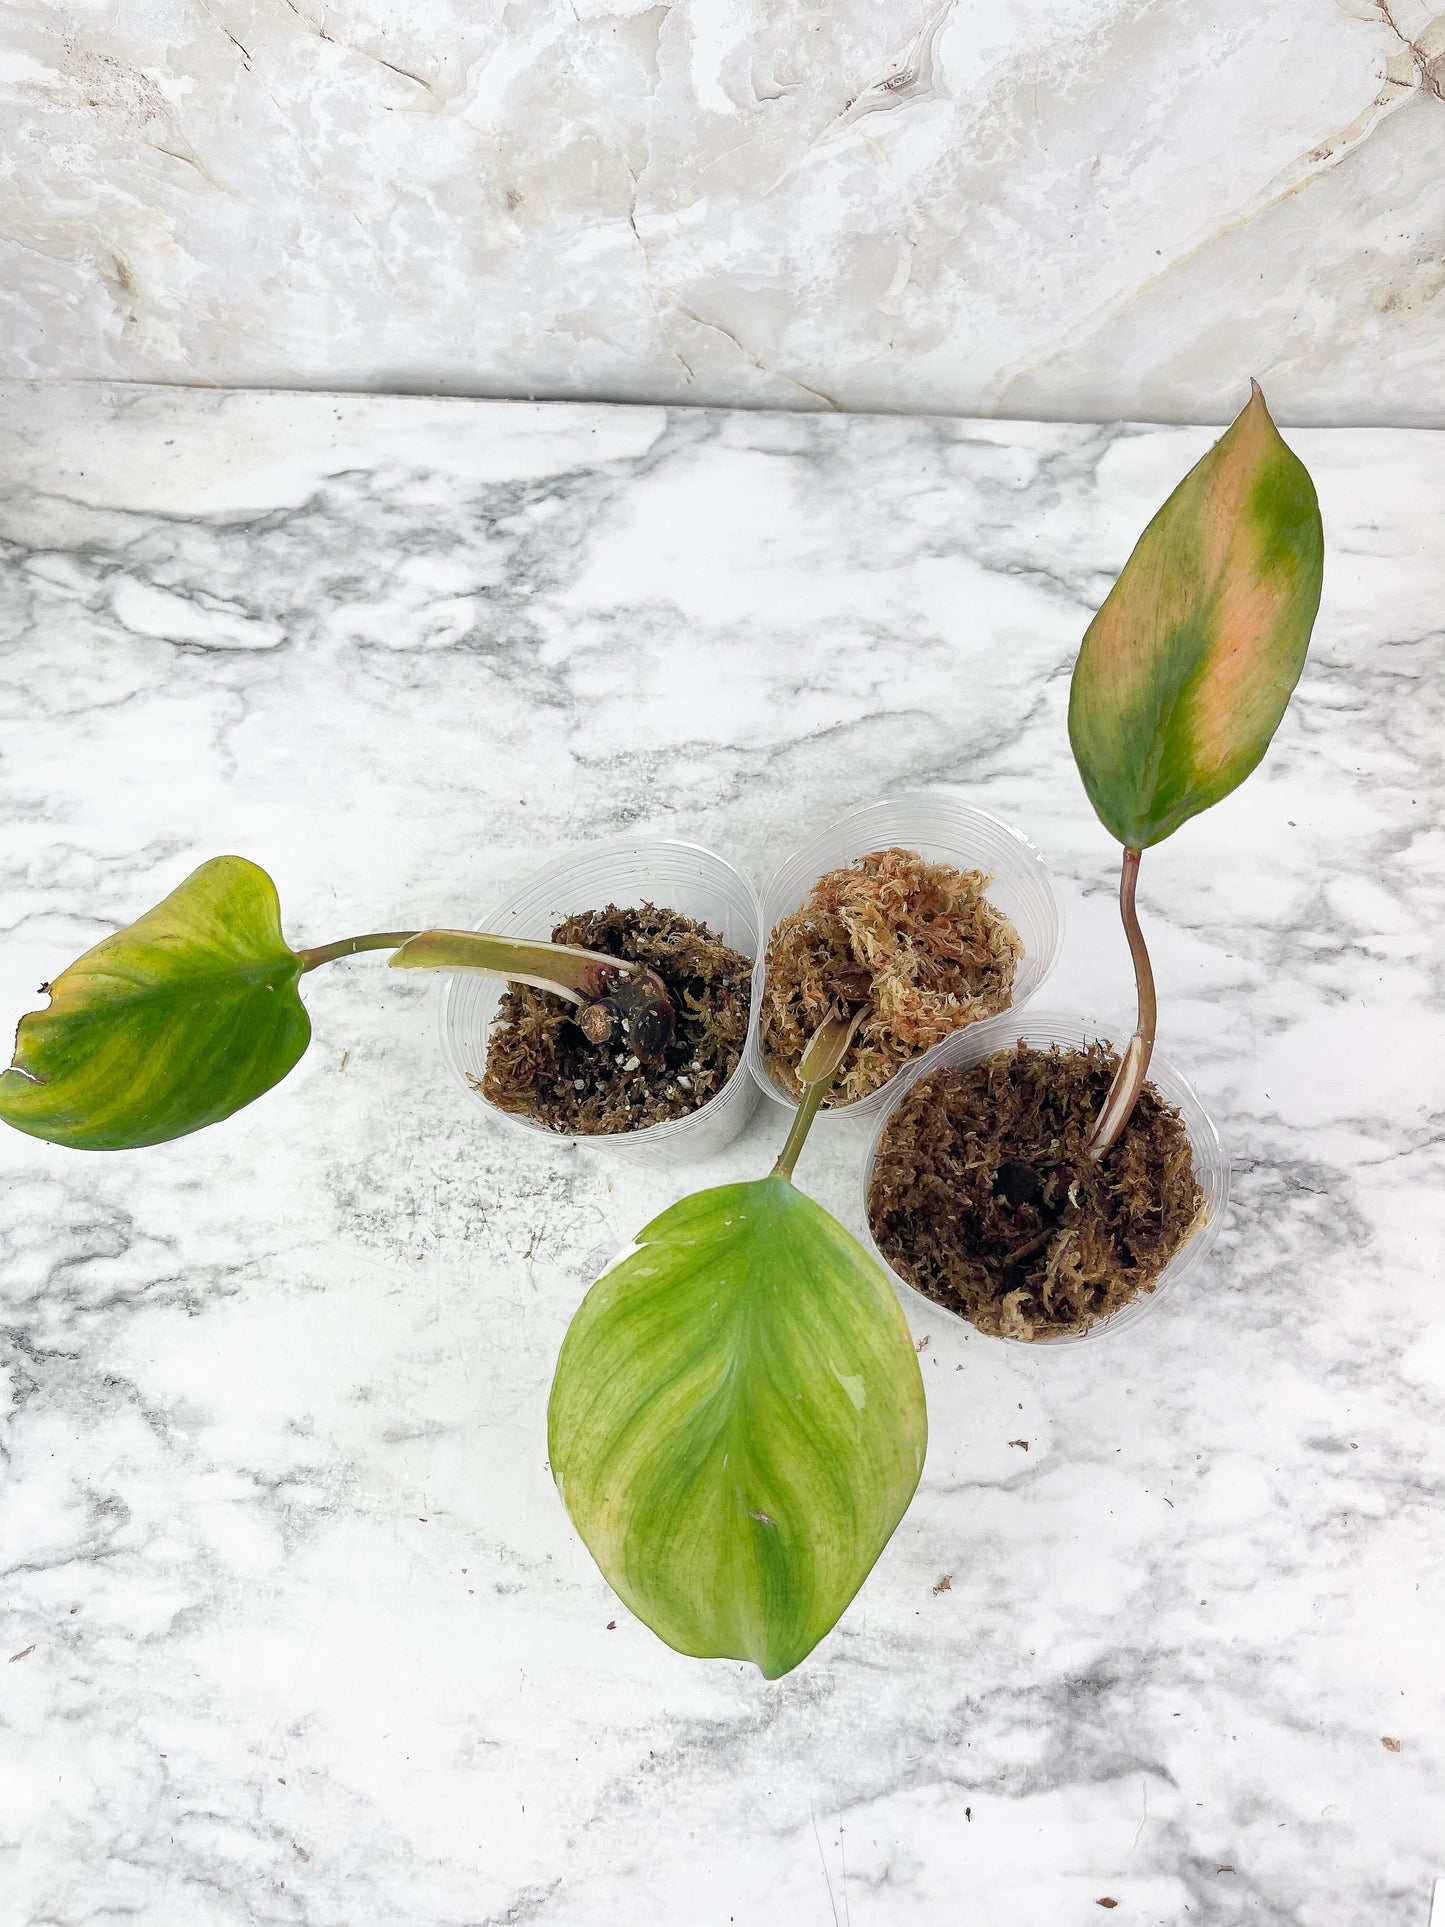 NOT FOR SALE: Grower Choice: Philodendron White Knight Rooting Cutting. Available 3